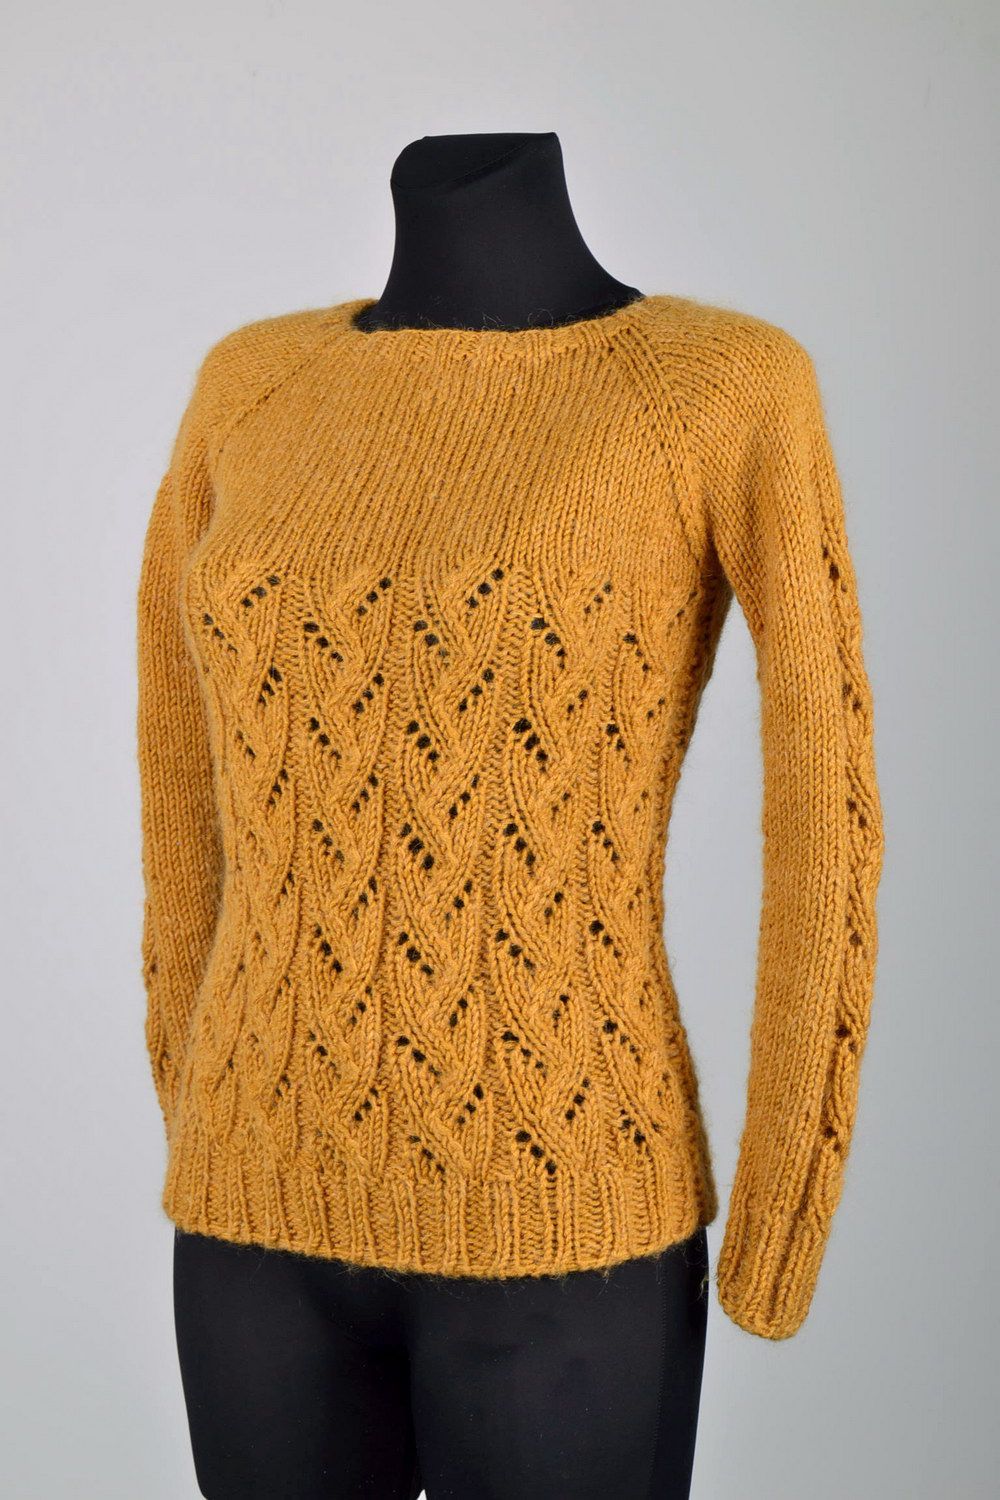 Kniited sweater of milk chocolate color photo 3